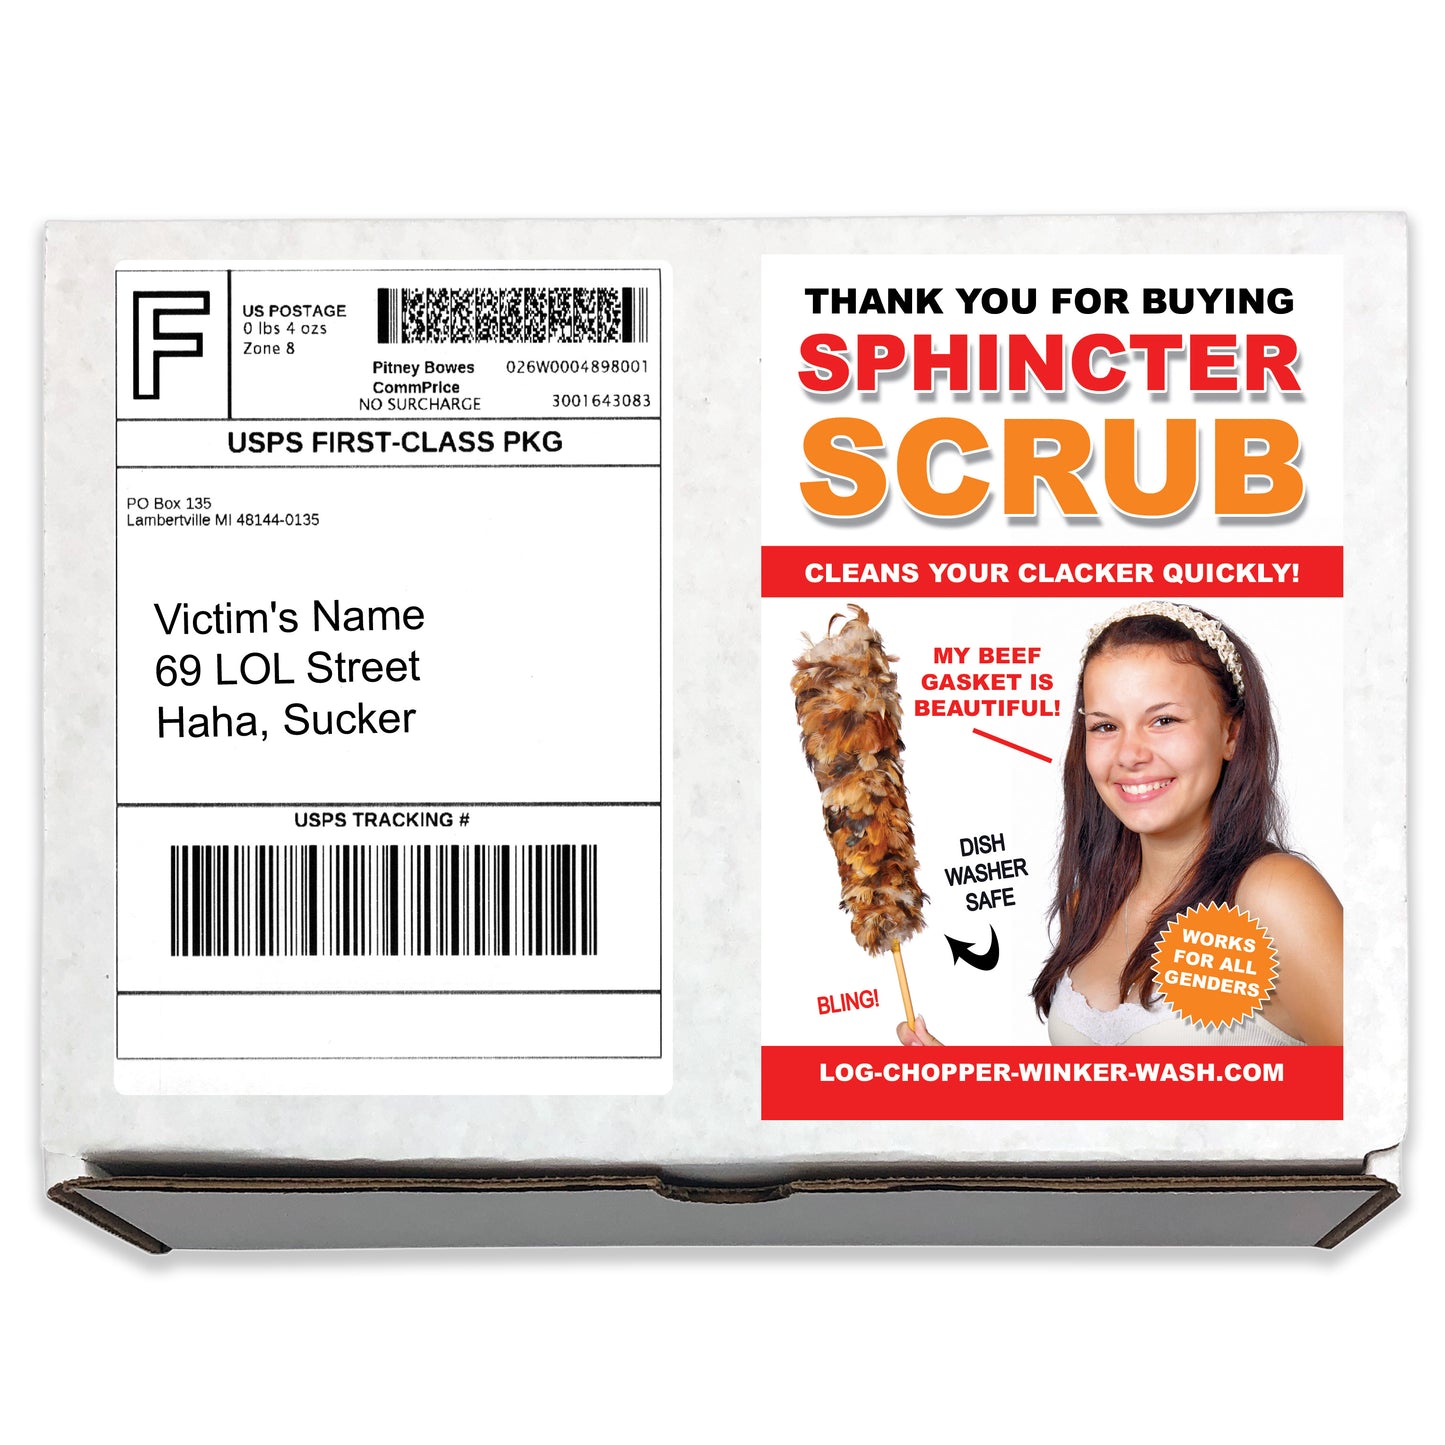 Sphincter Scrub Embarrassing Prank to Mail